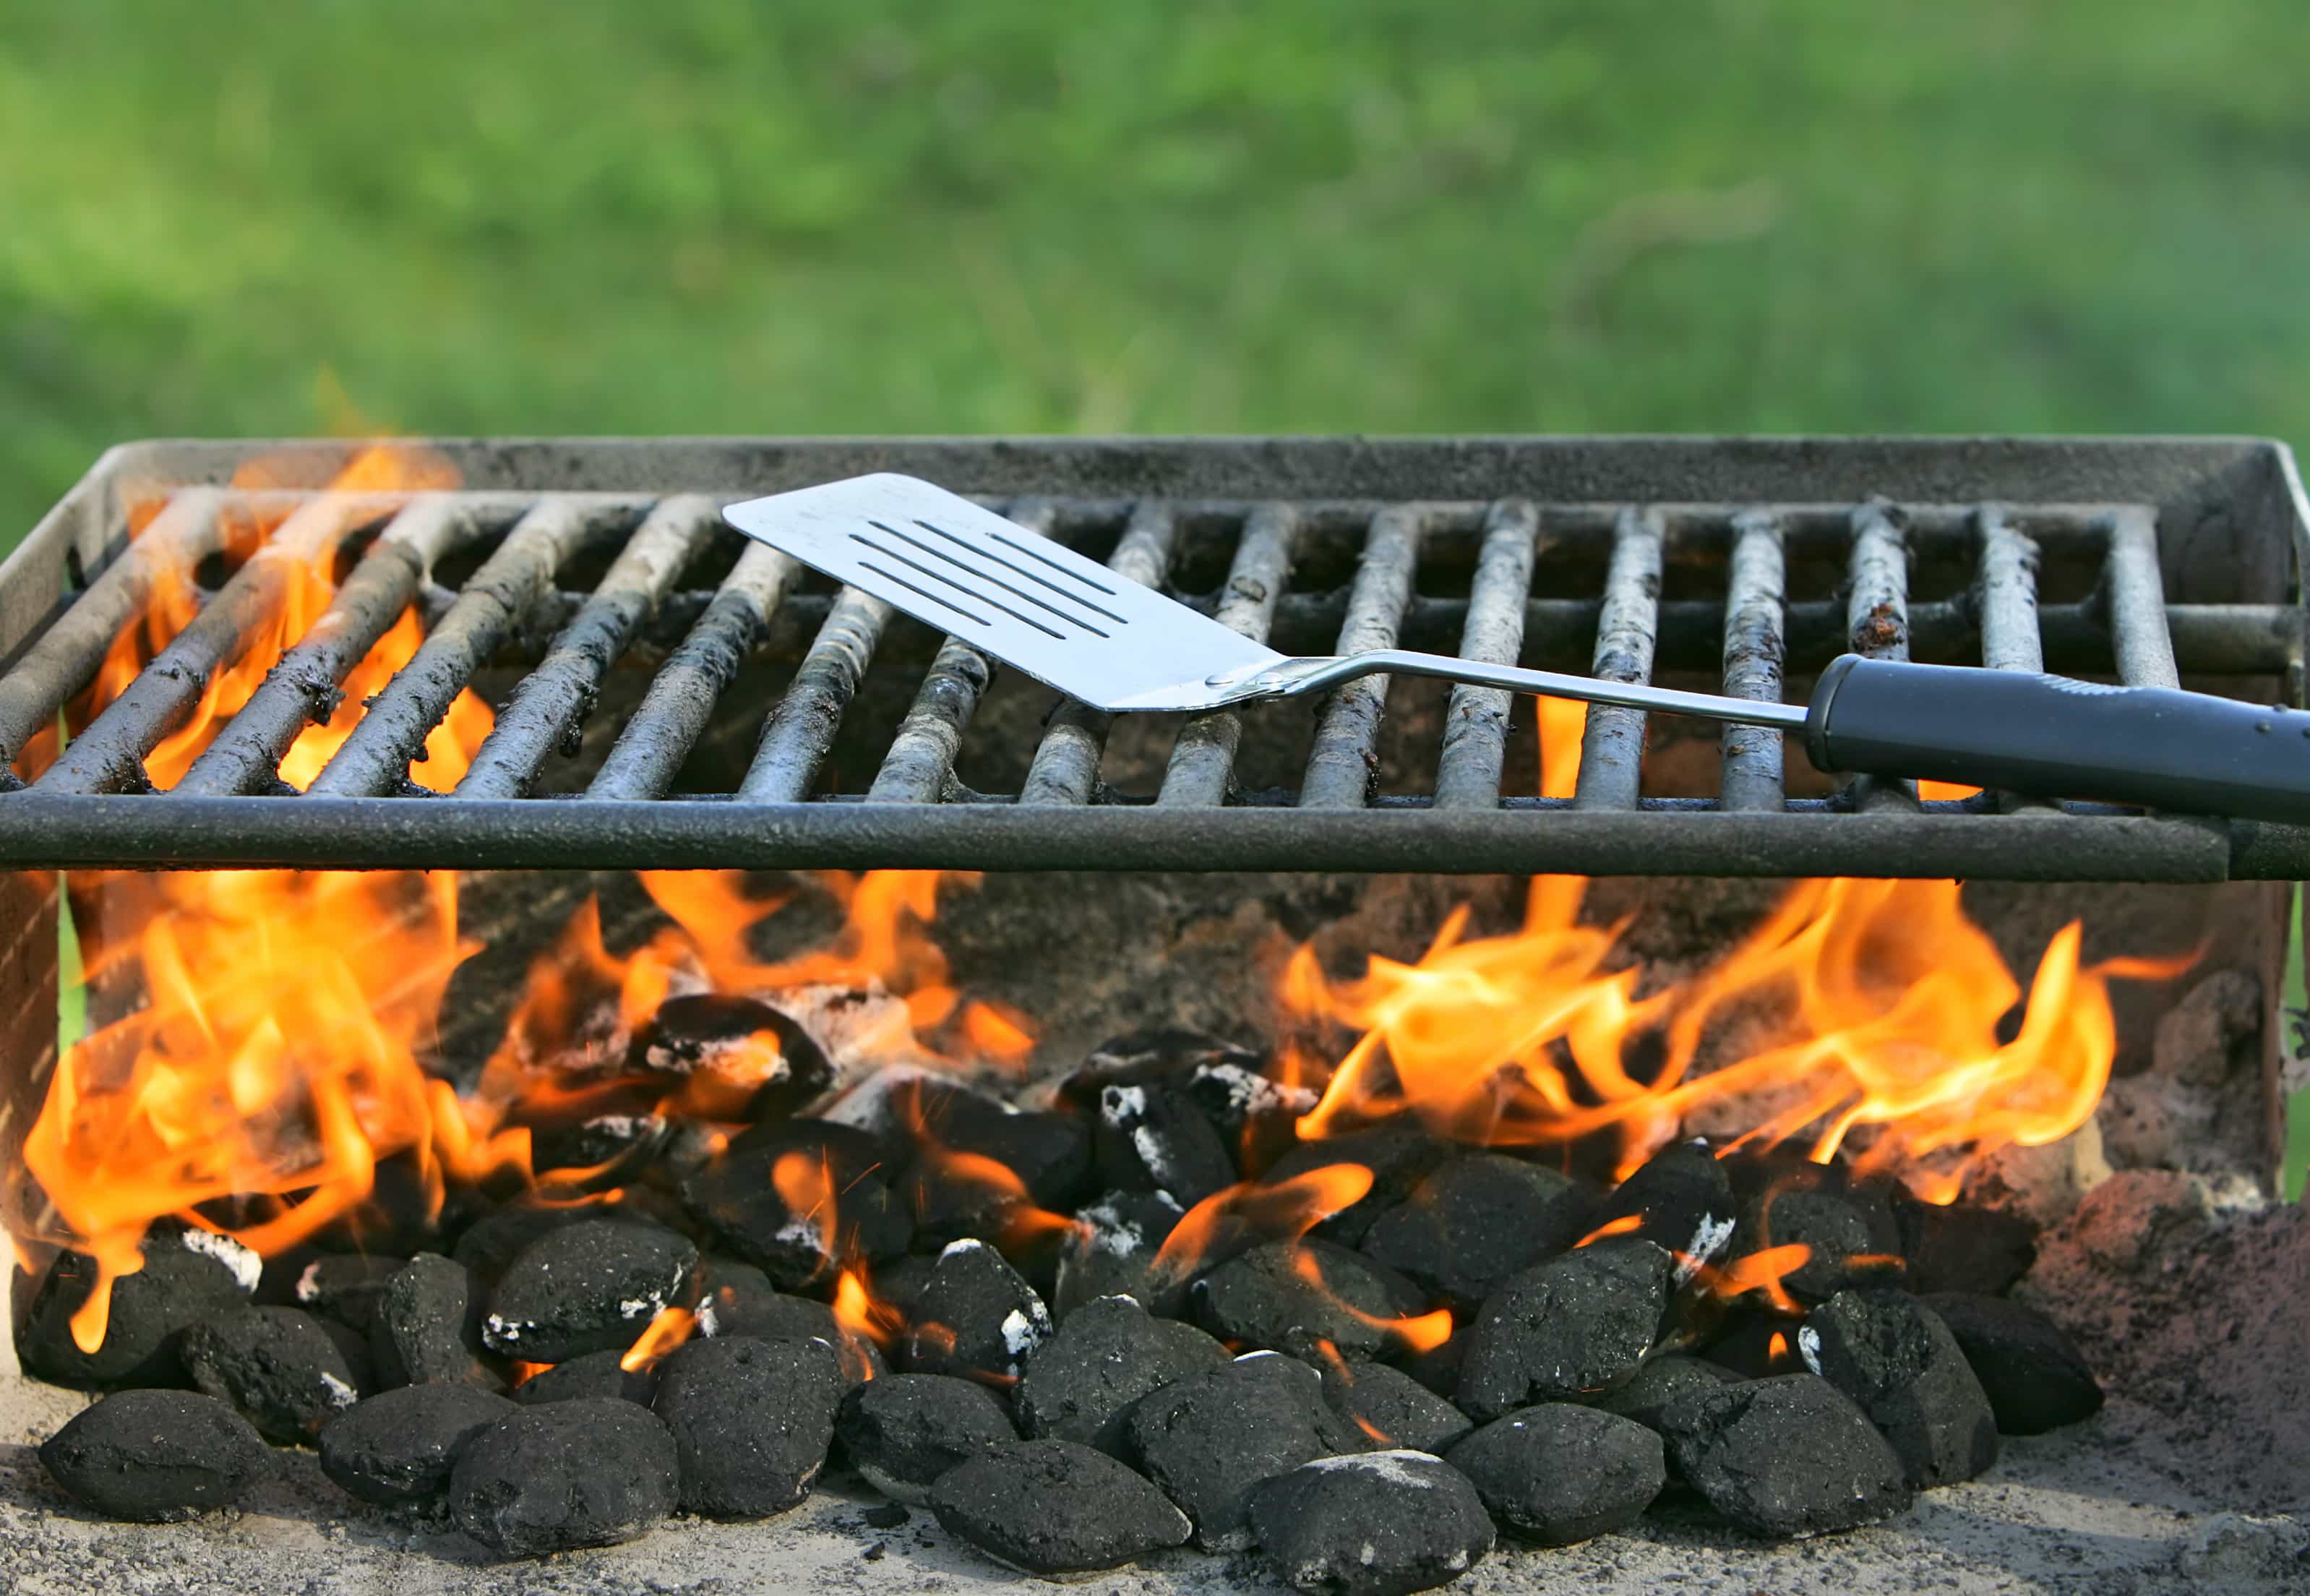 How To Use A Charcoal Grill﻿: An In-Depth Guide